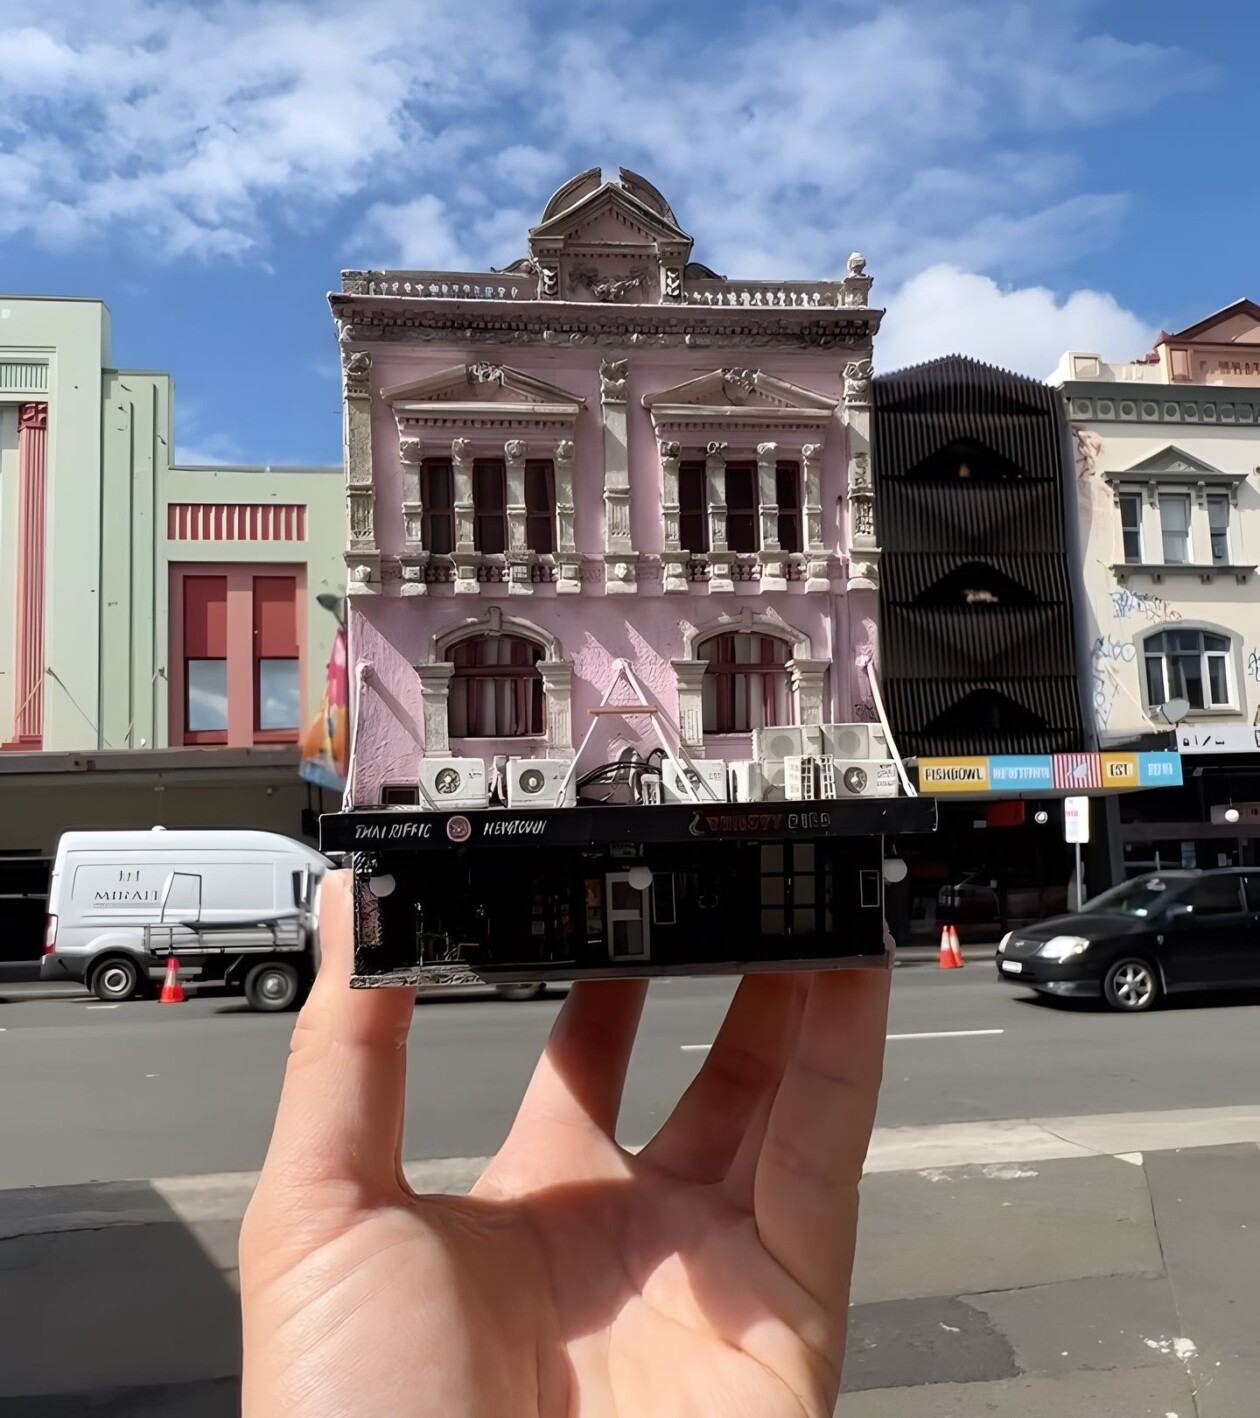 Whimsical Everyday Life And Historical Buildings In Miniature By Mylyn Nguyen (2)